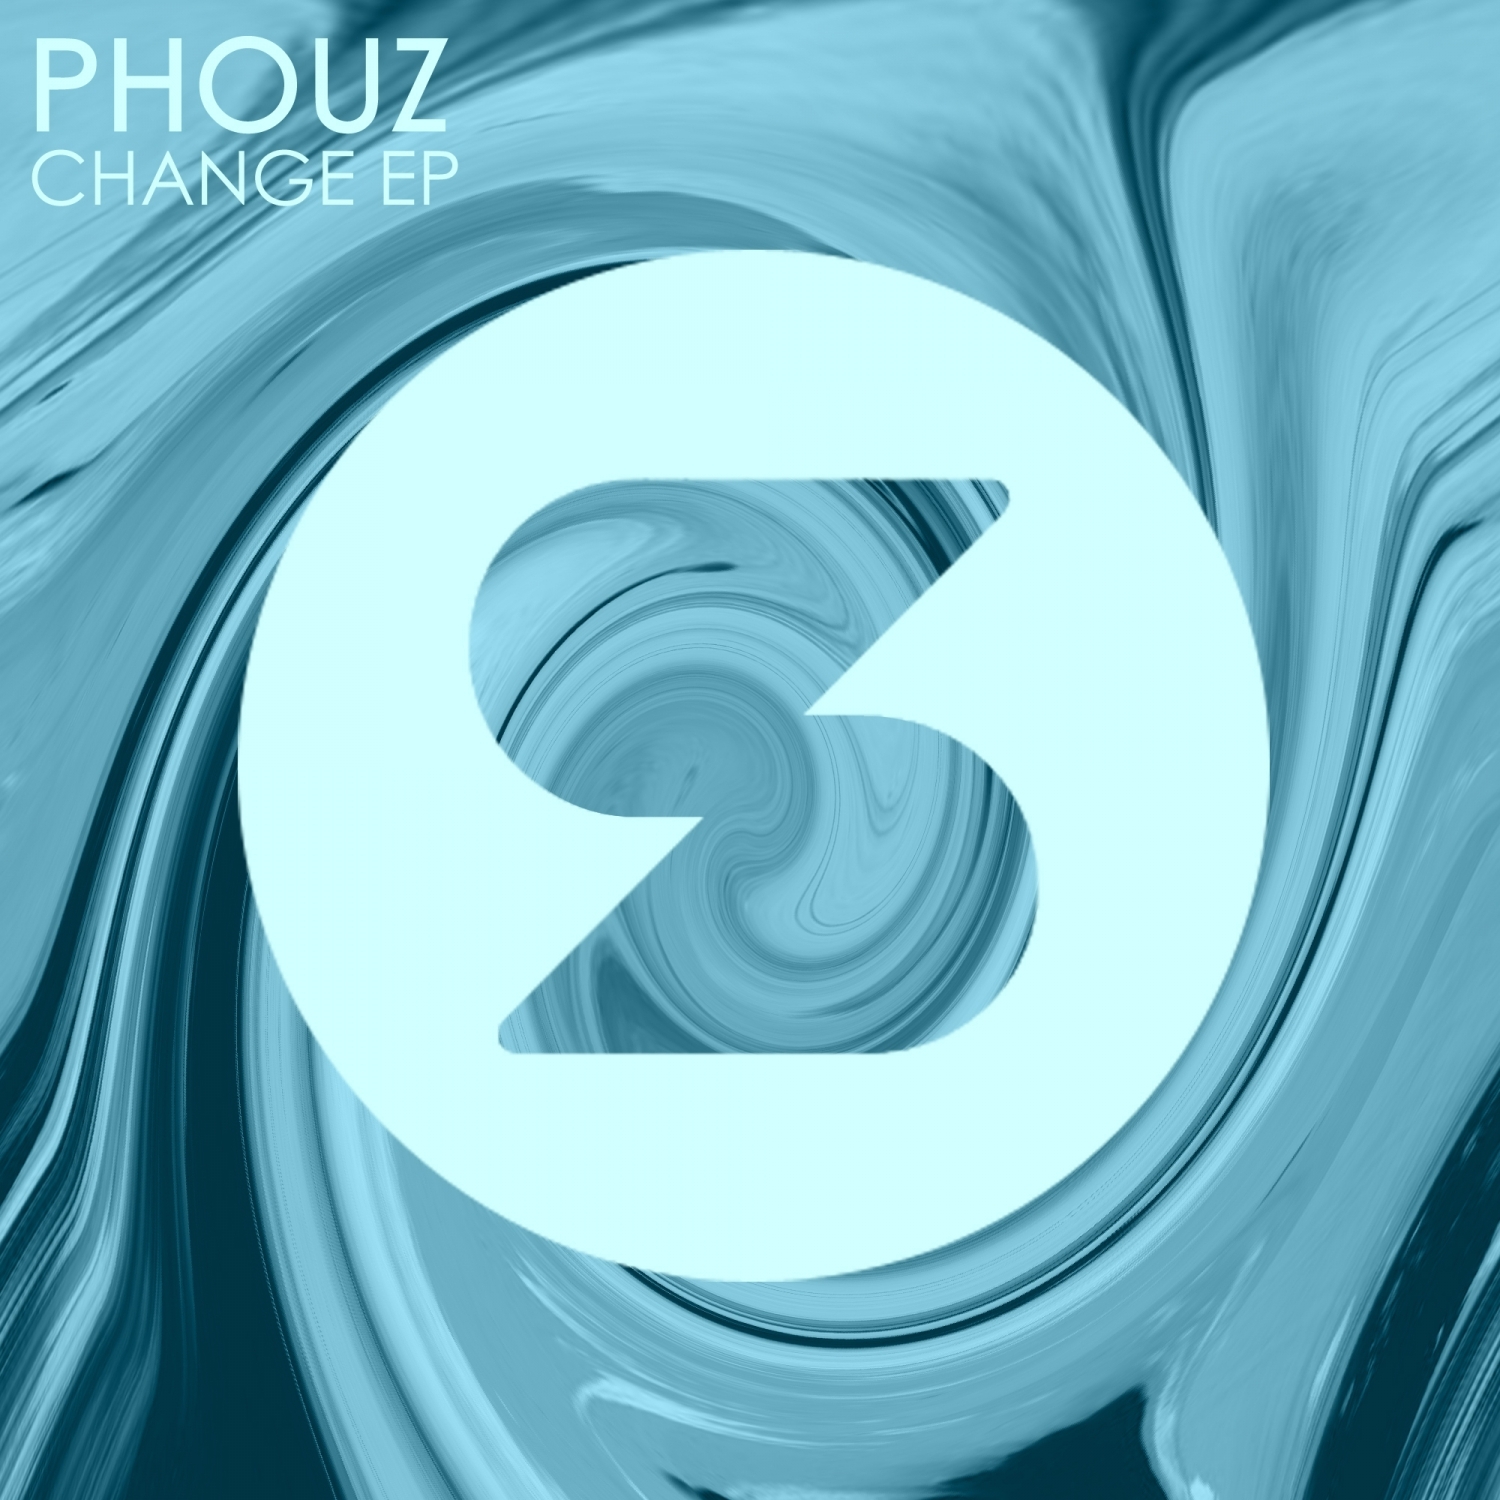 Phouz Sky is Black here (Ambient Mix). Changes mixed